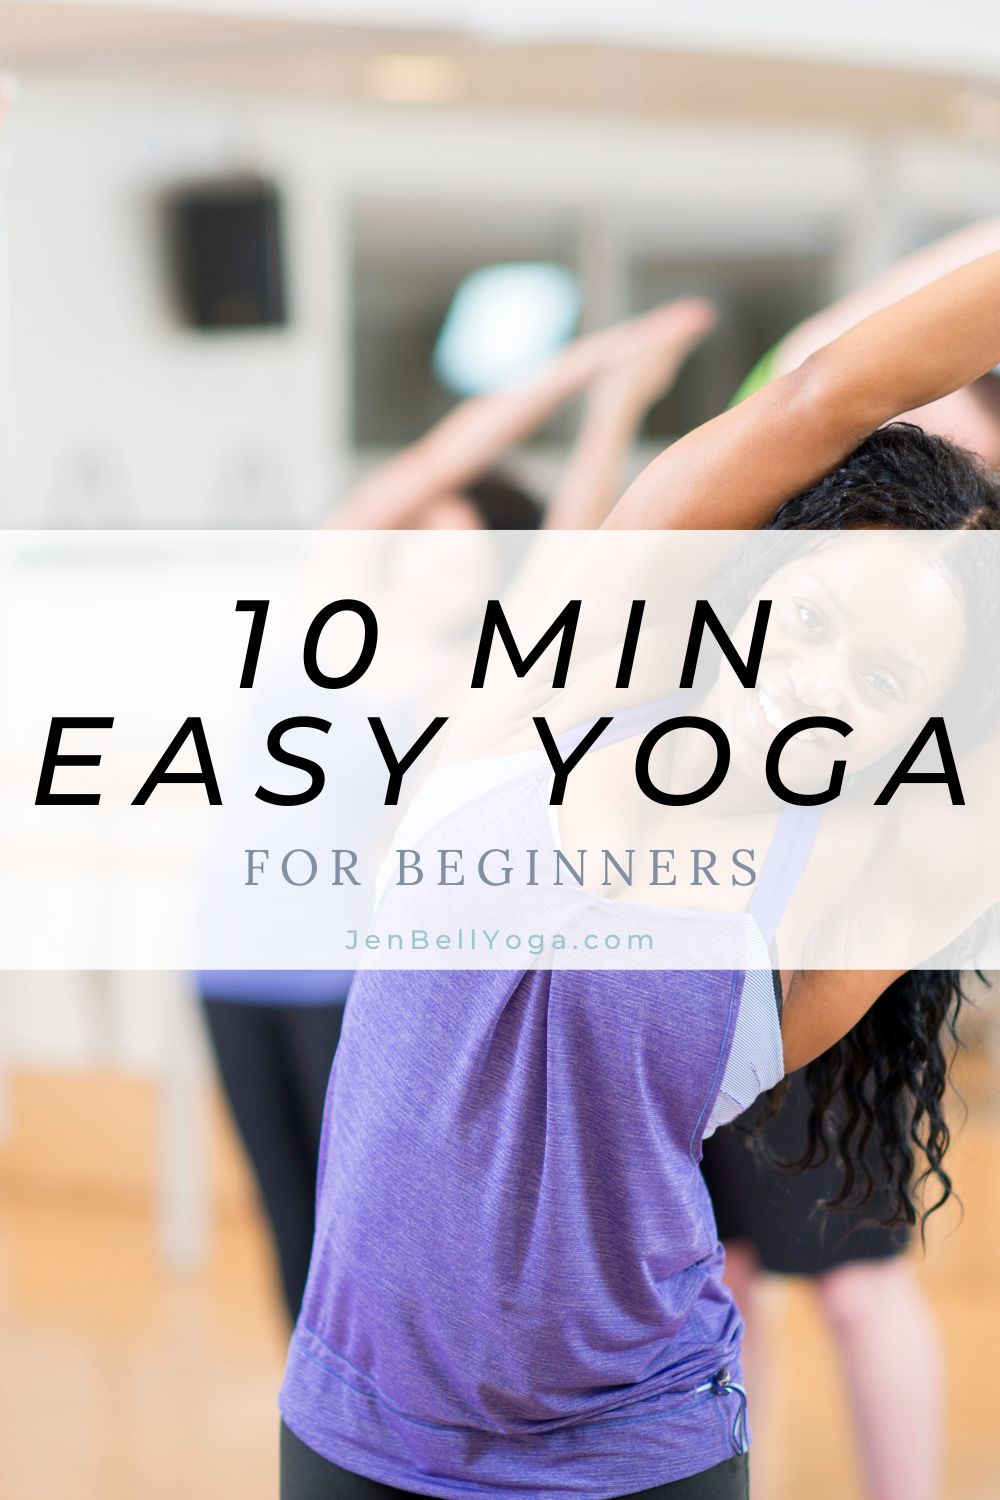 10 Best Yoga Poses to Stay Calm and De-Stress | Skinny Ms.